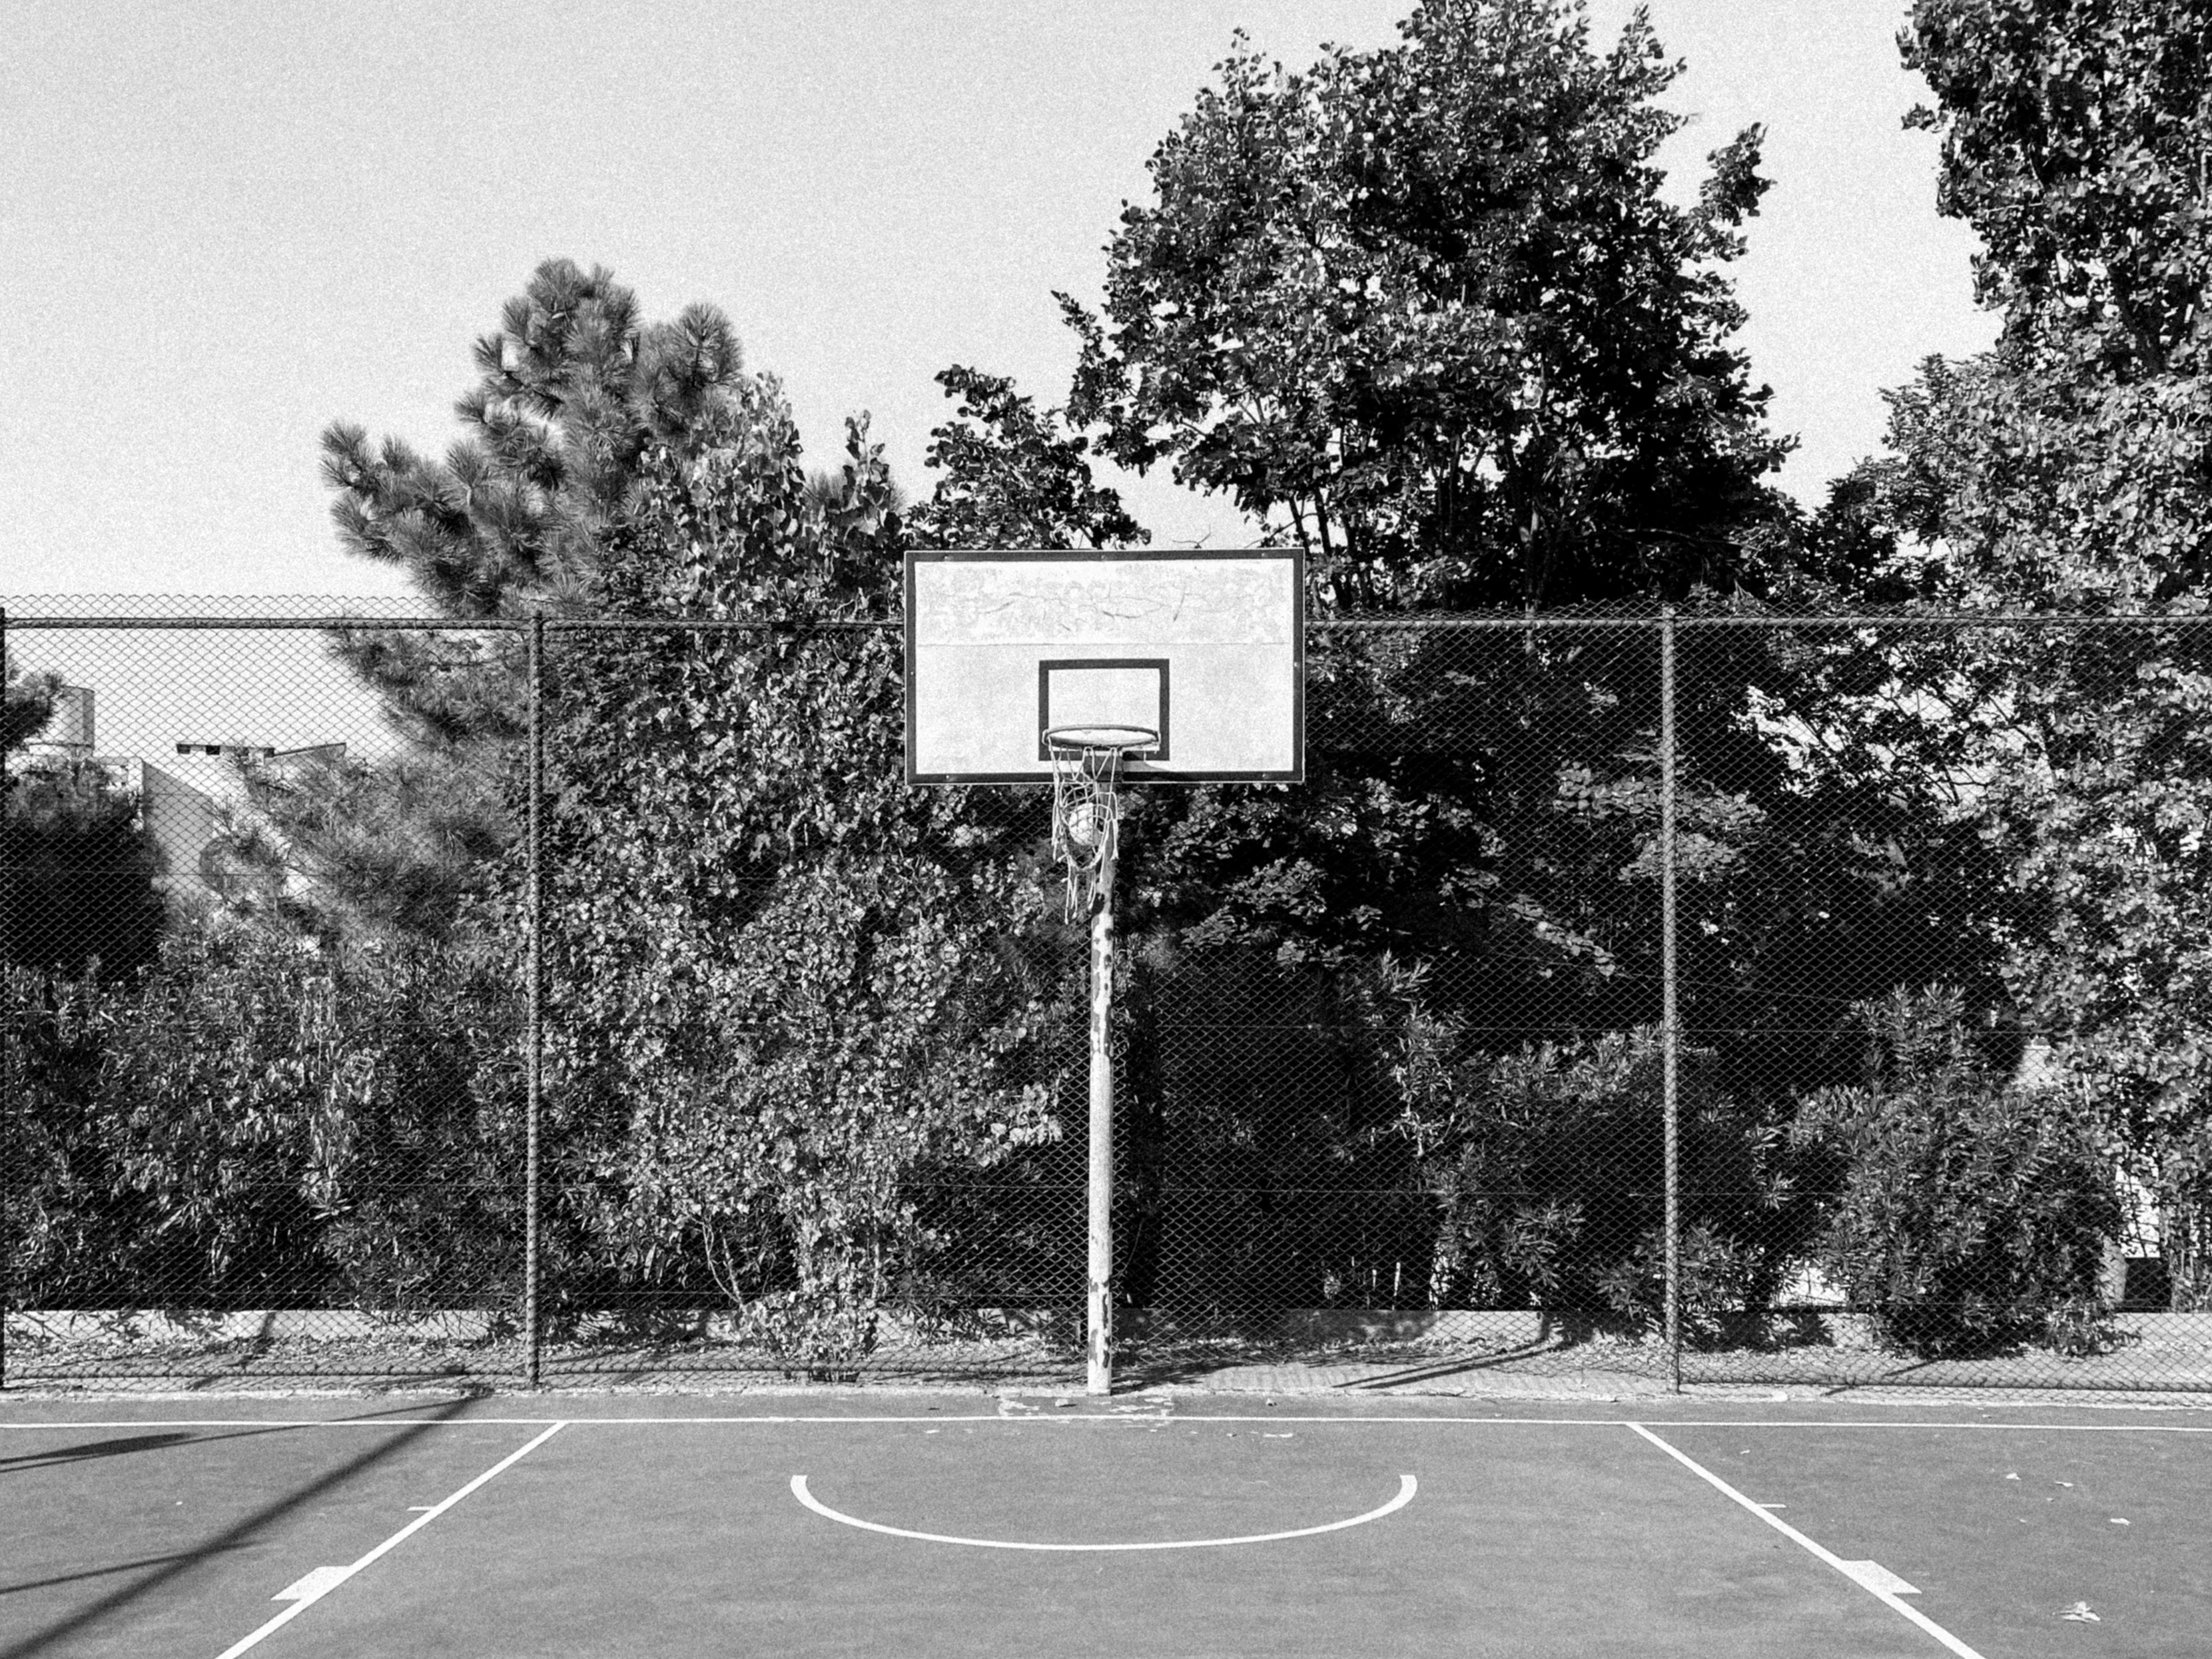 black and white photo of a basketball hoop / court.